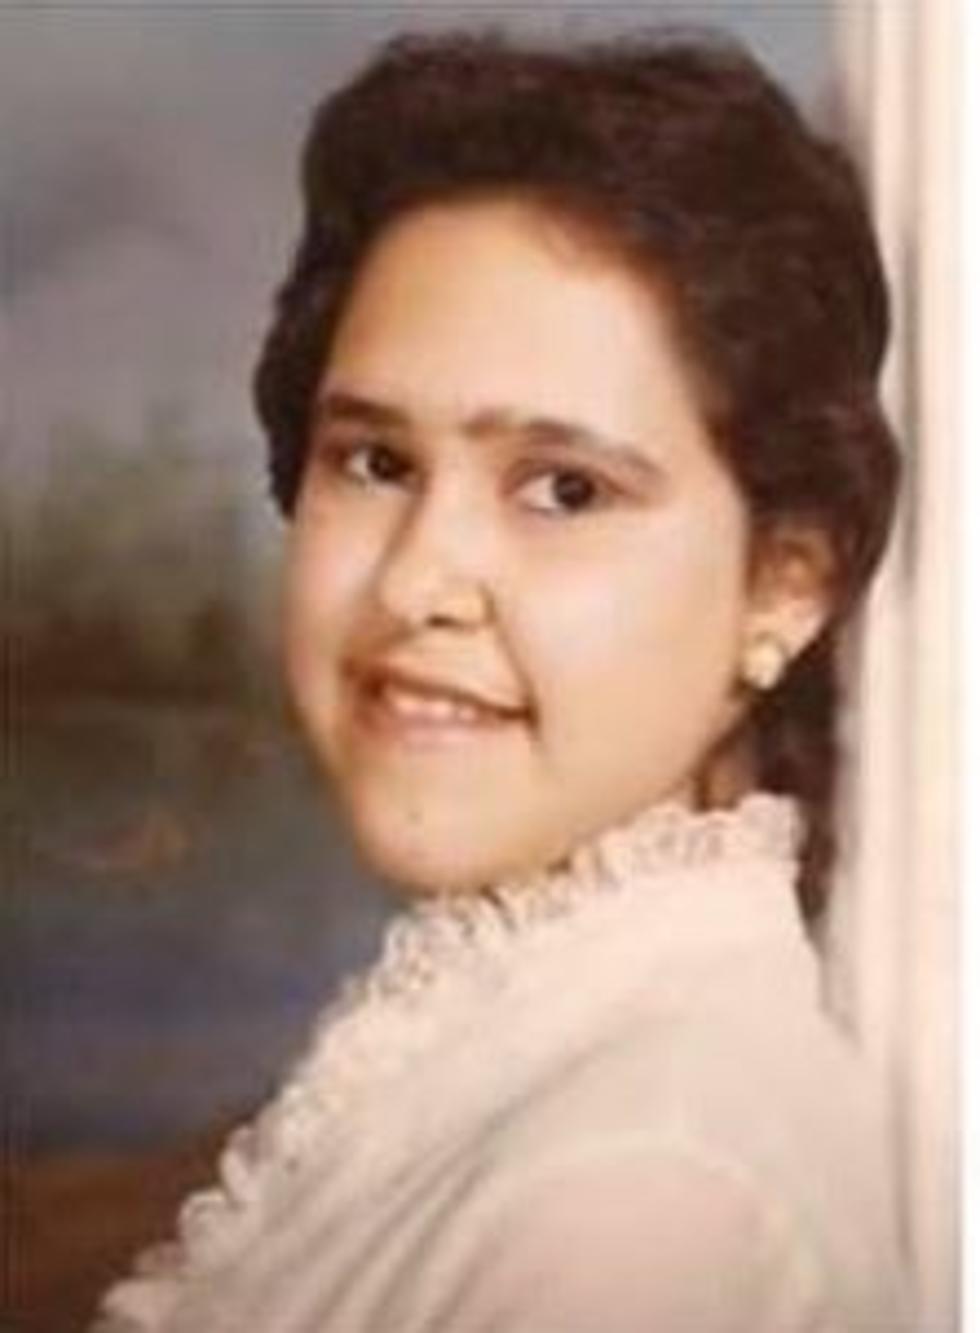 New Iberia Family Seeks New Information in 32 Year Old Unsolved Murder